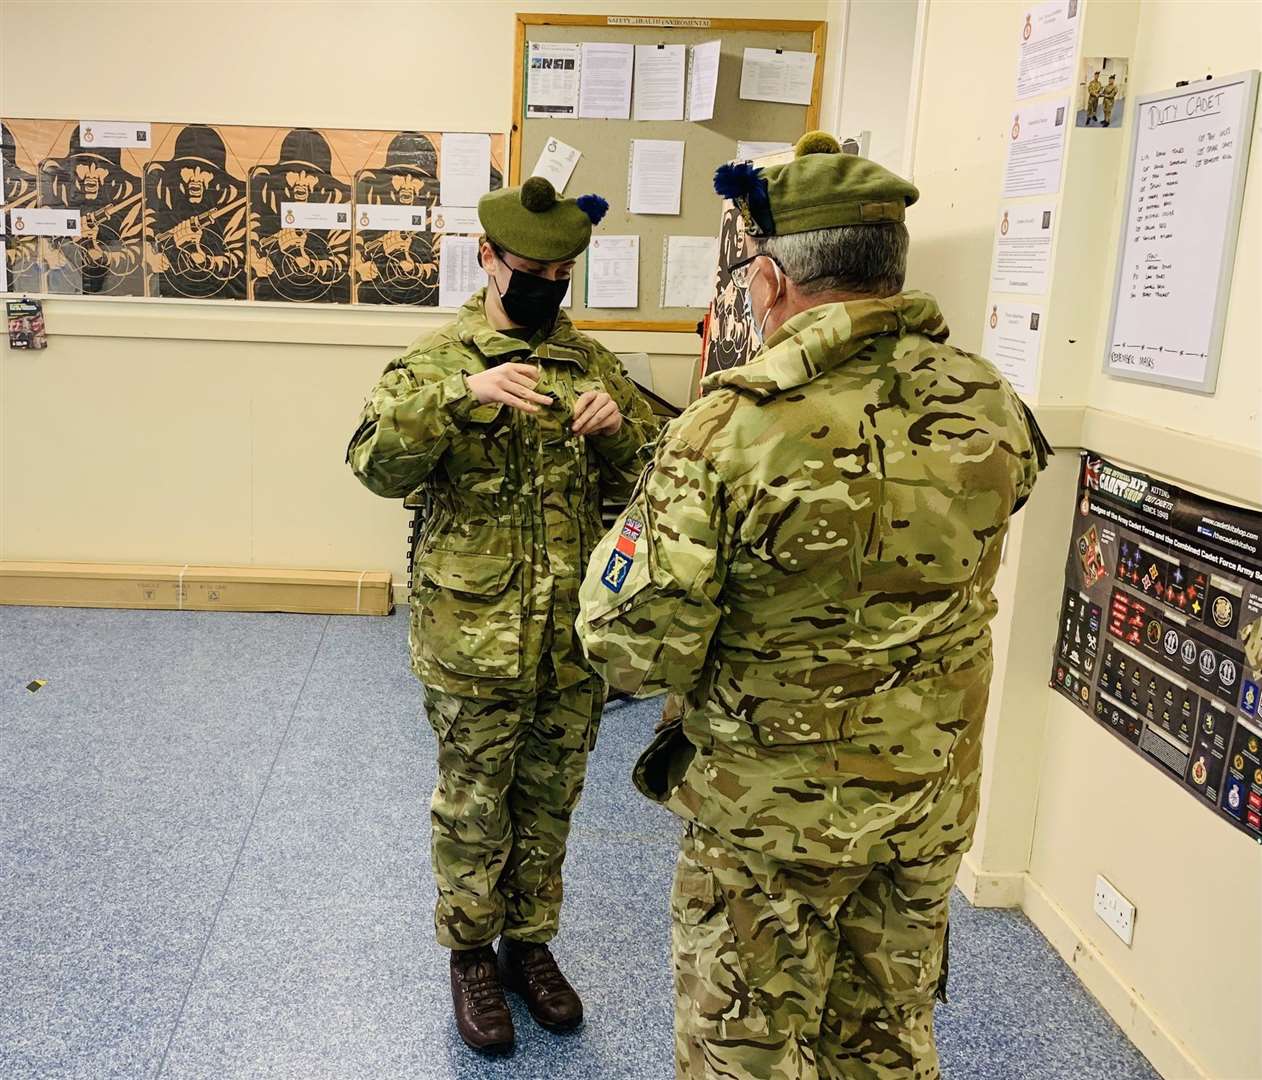 Lani8 Jones (left) receives her Sergeant stripes from Caithness Company Commander Major McLean after completing her training.